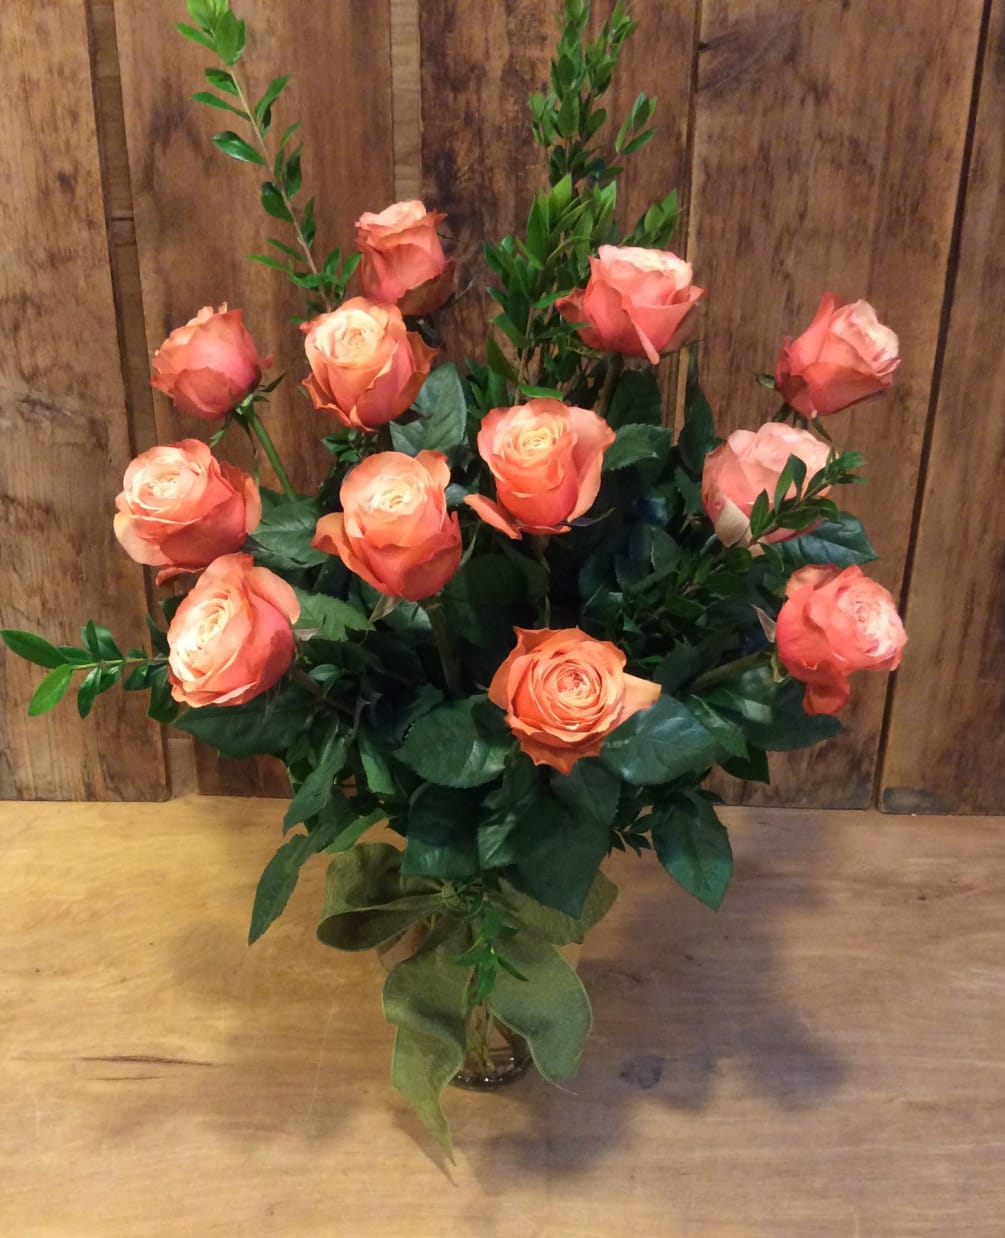 Just Peachy!!! These peach roses open up to reveal a soft peach